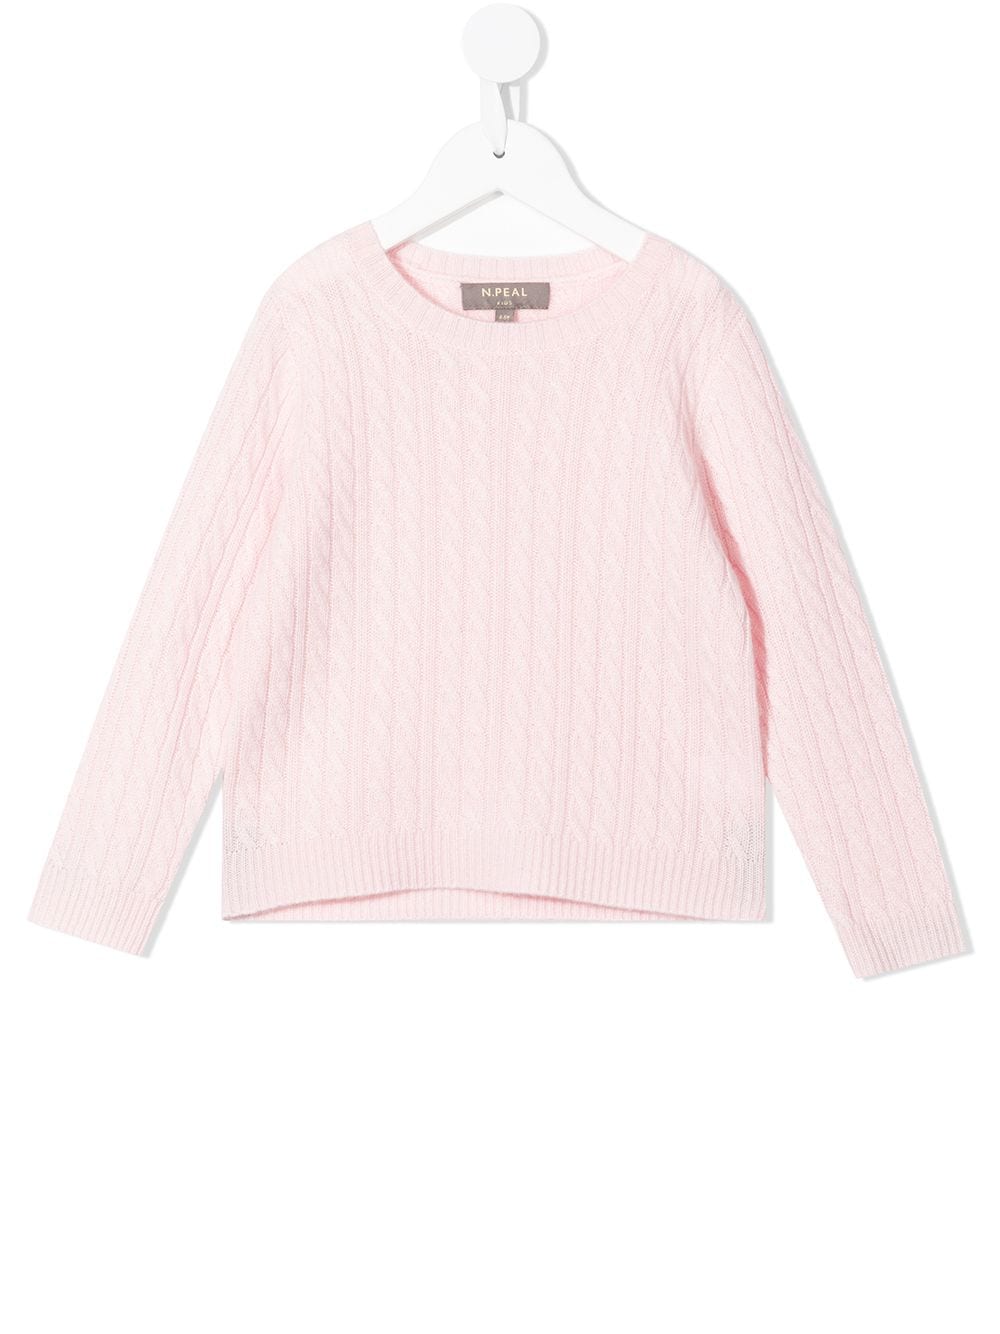 Image 1 of N.PEAL KIDS knitted organic cashmere jumper